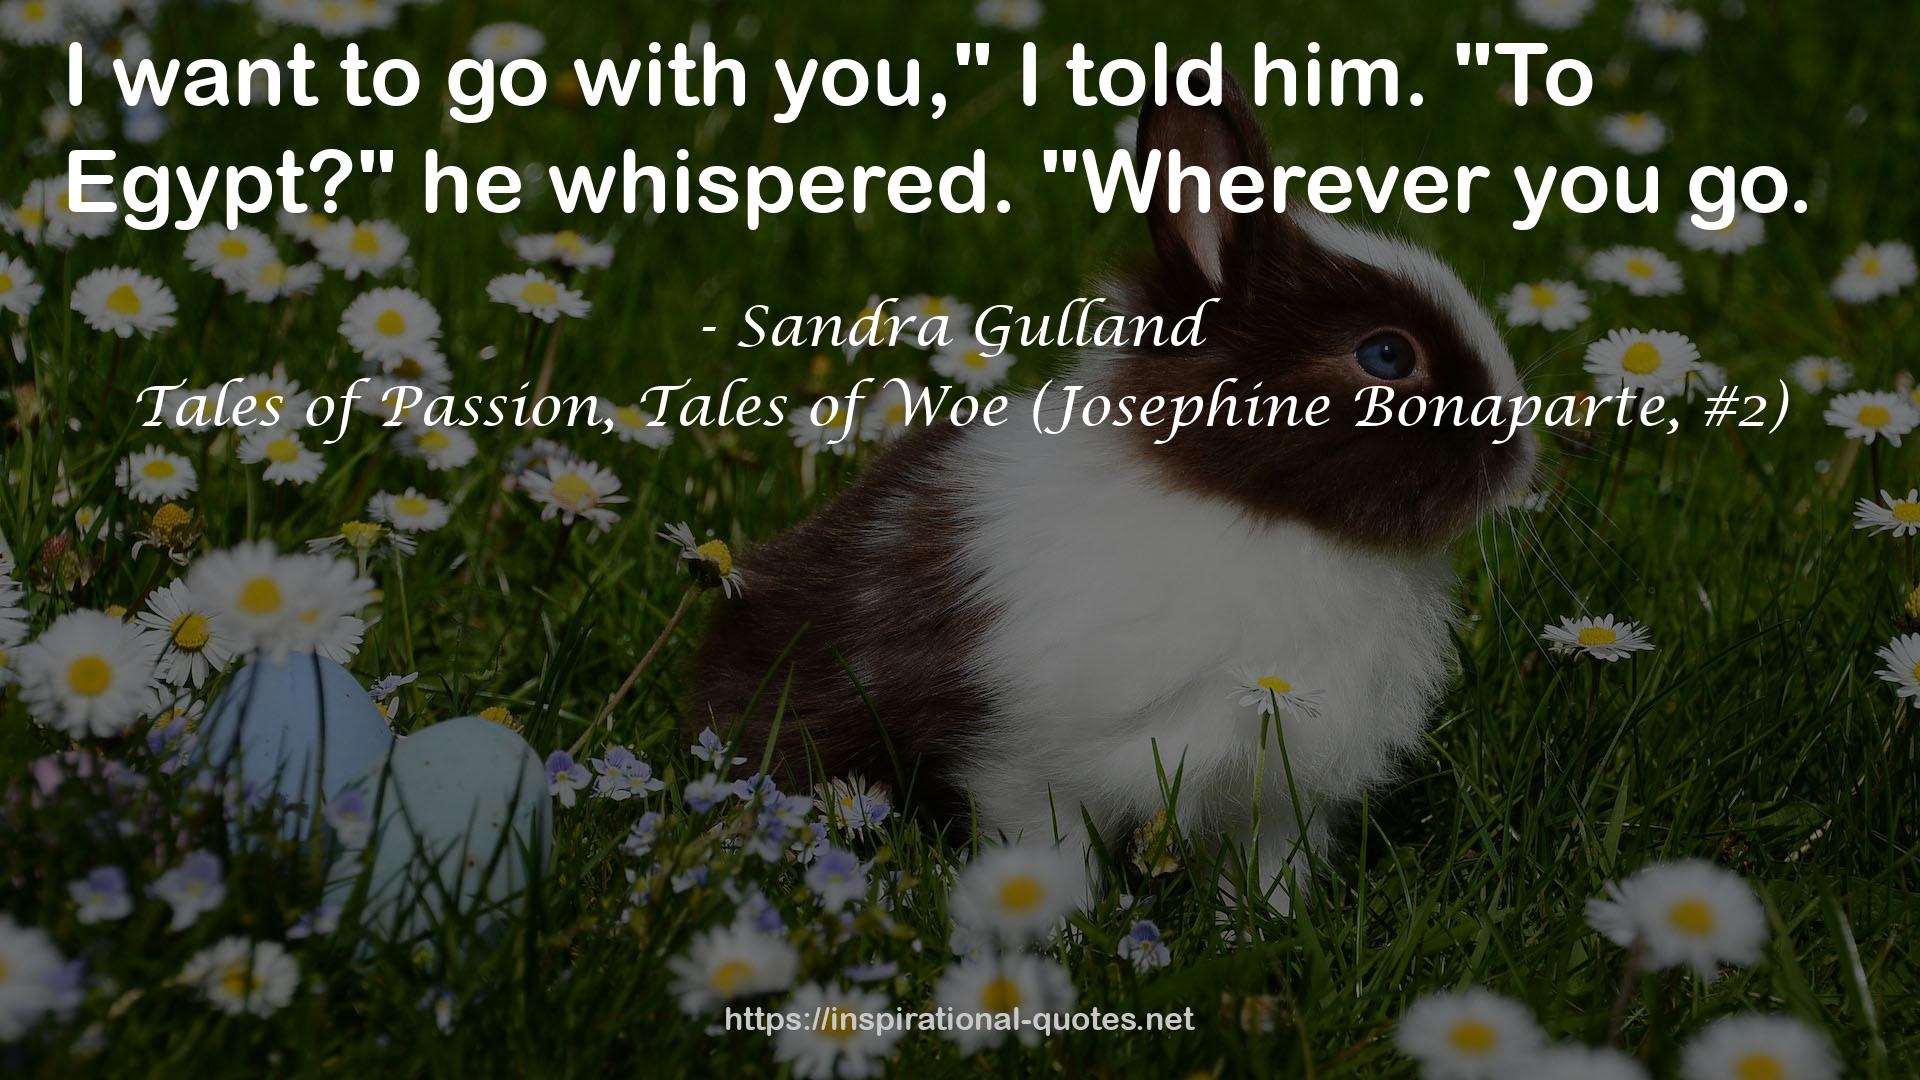 Tales of Passion, Tales of Woe (Josephine Bonaparte, #2) QUOTES